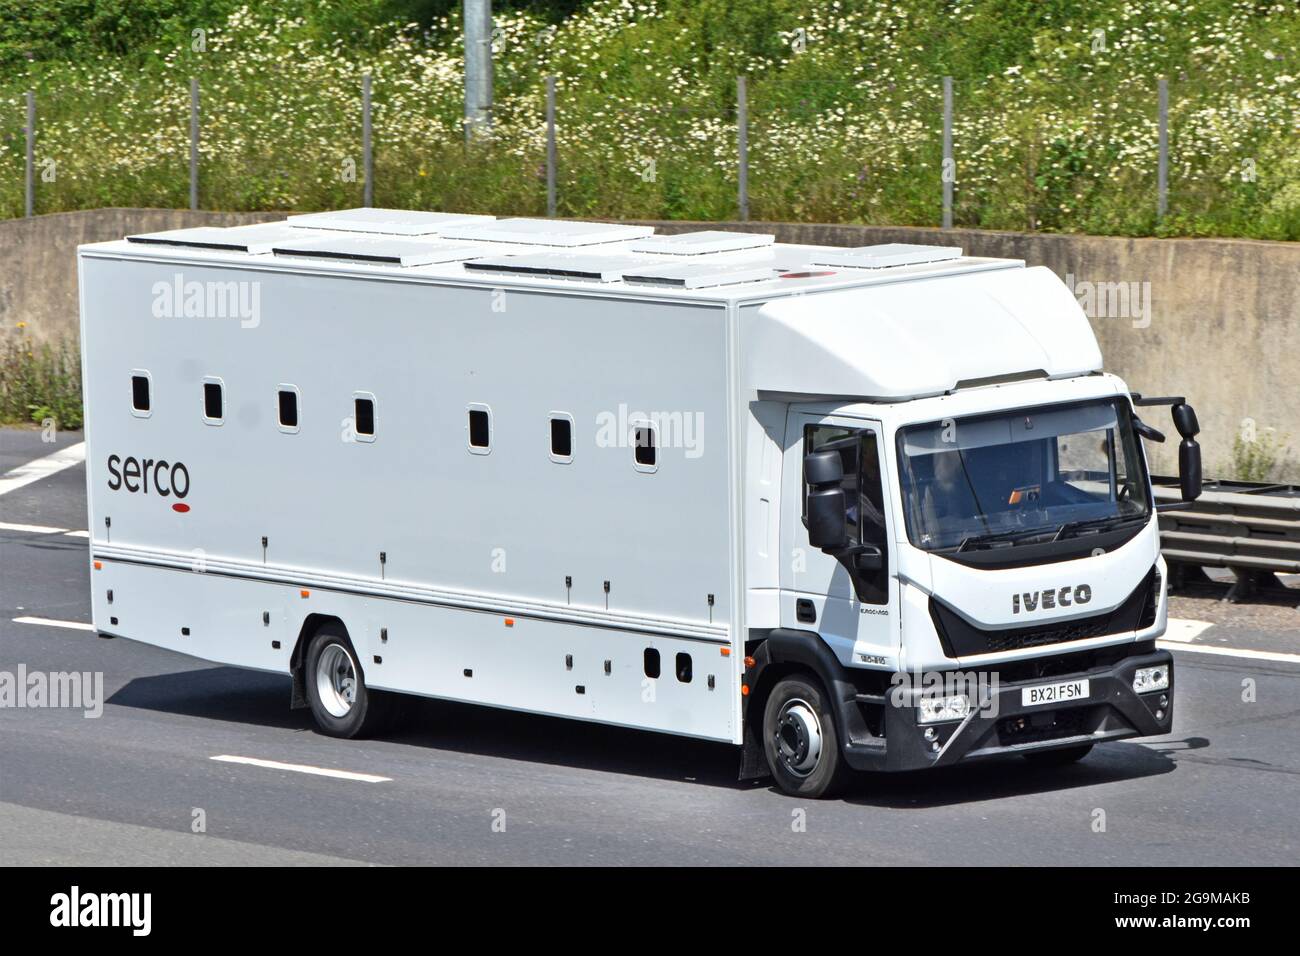 Aerial view front side & roof Iveco prisoner transport van & driver operated by Serco public service transportation business driving along uk motorway Stock Photo